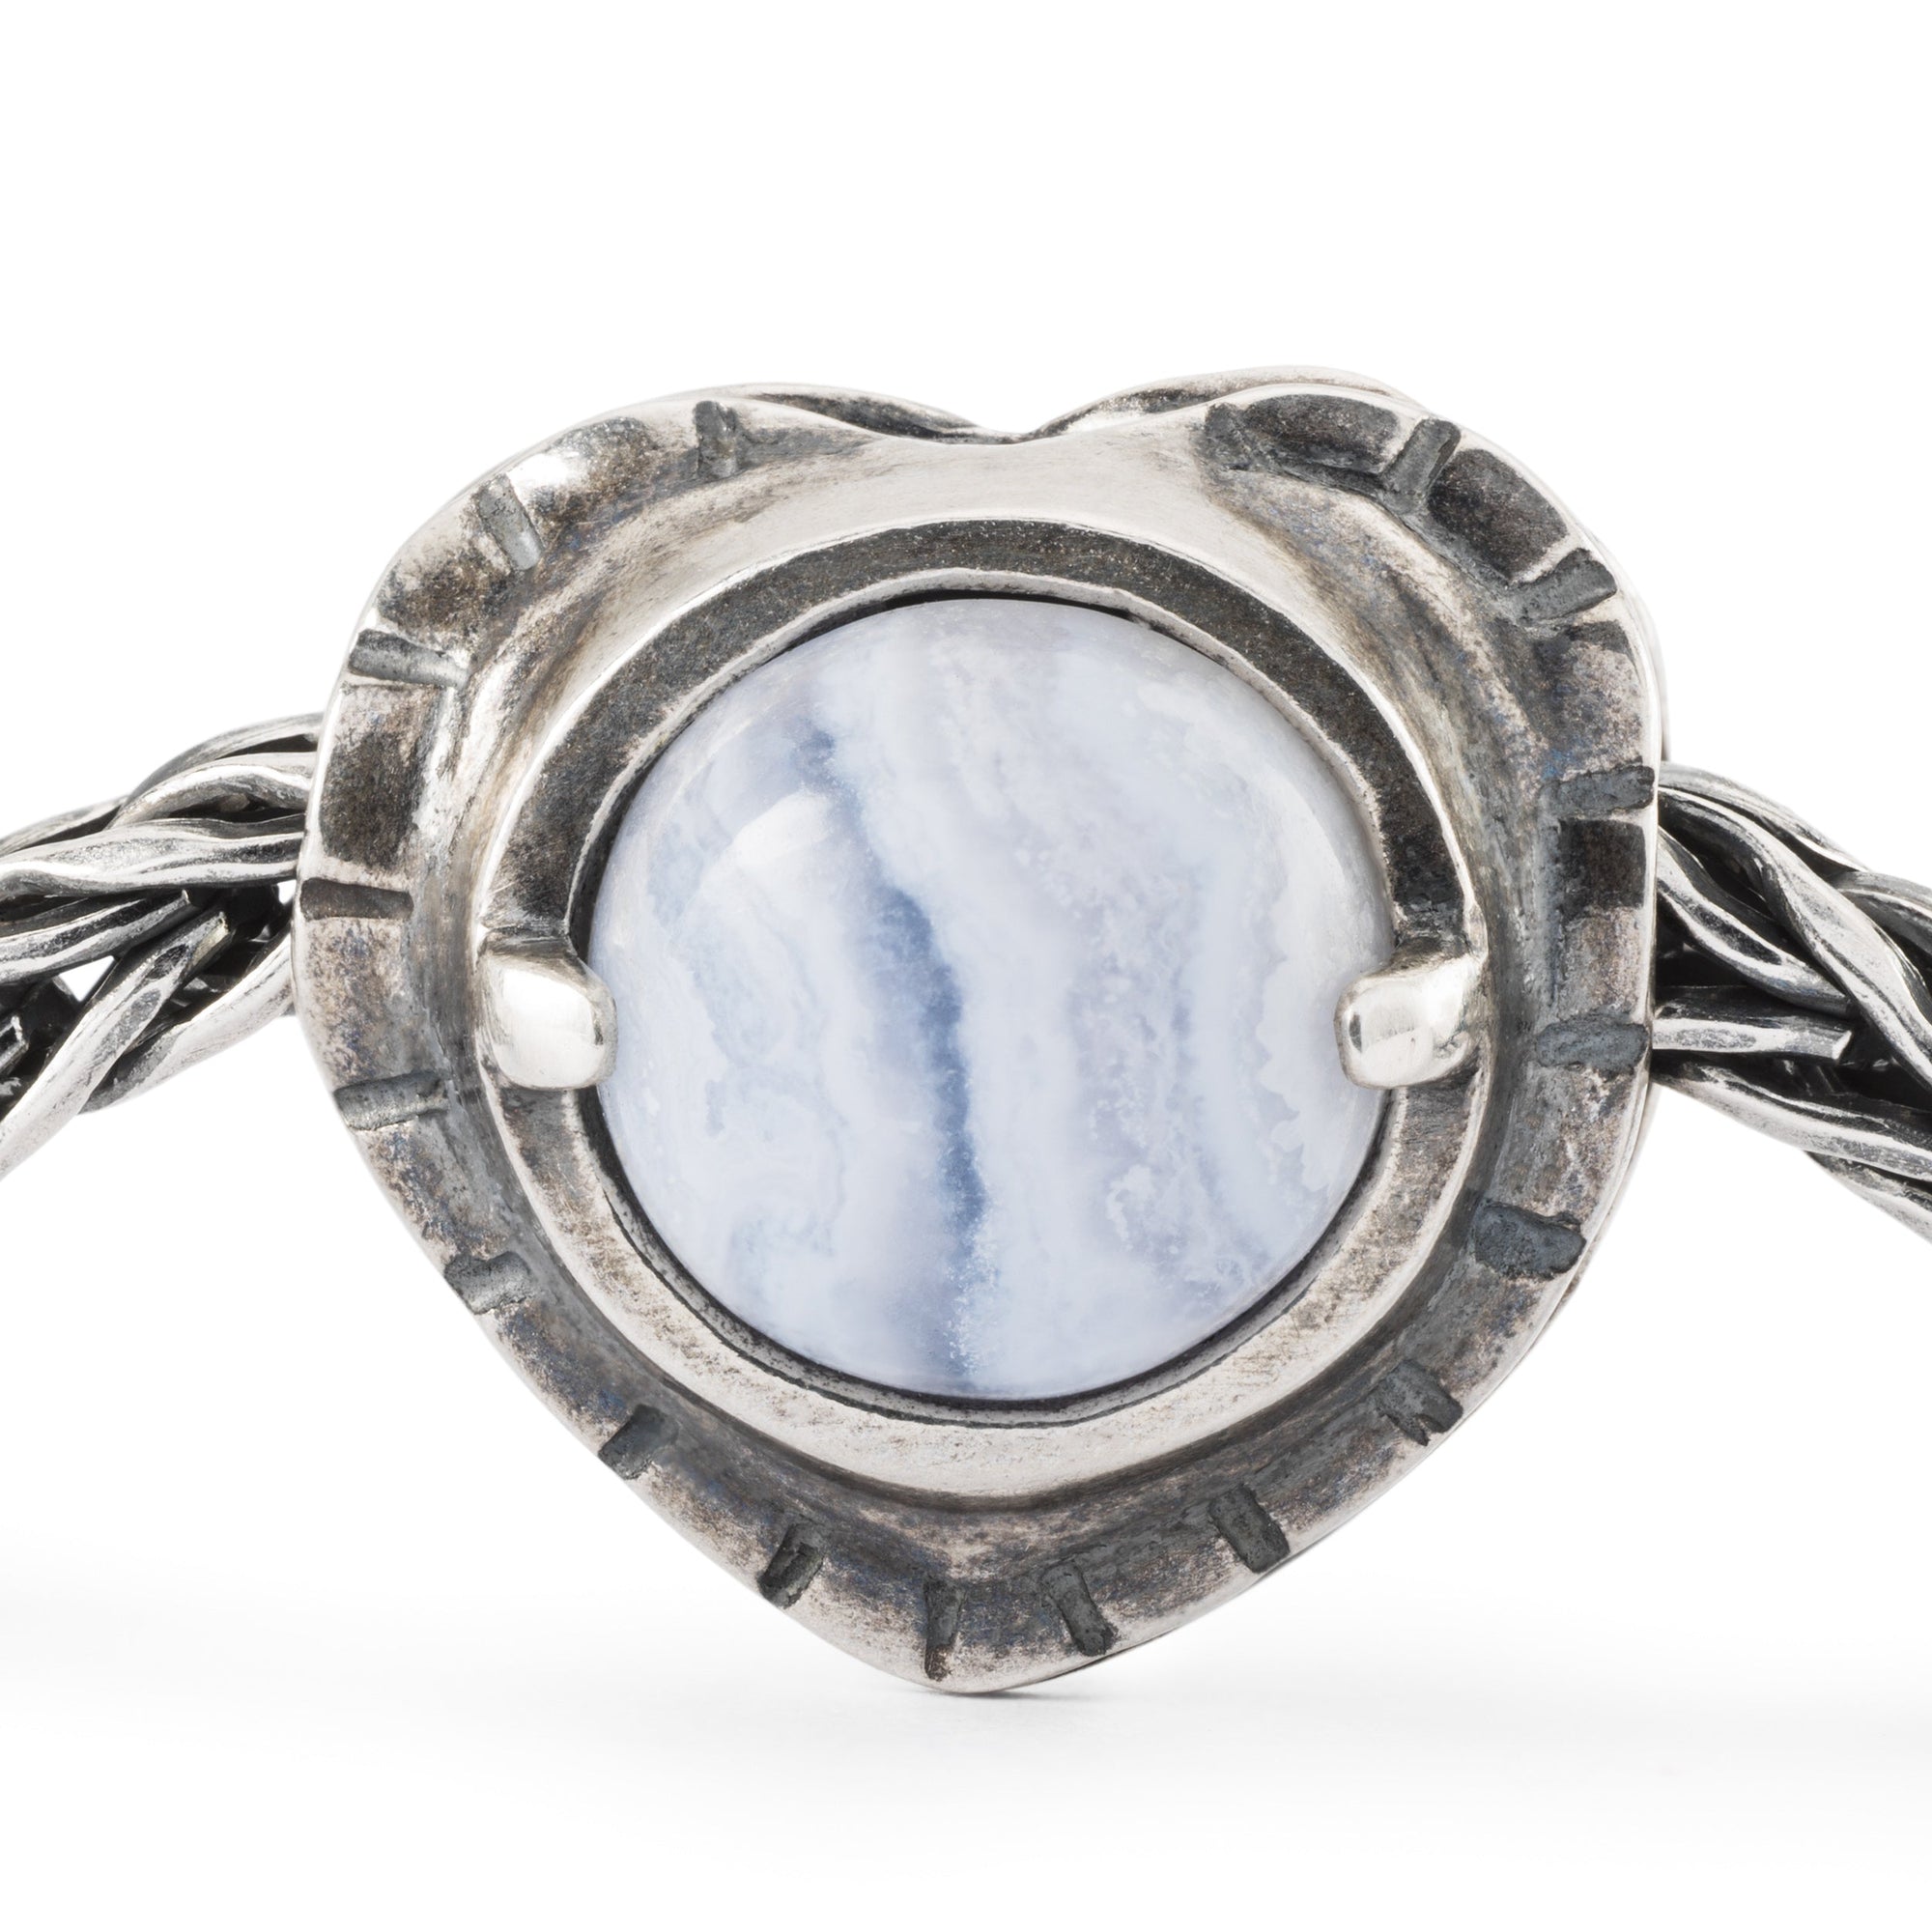 trollbeads silver heart bead with blue lace agate bead in middle